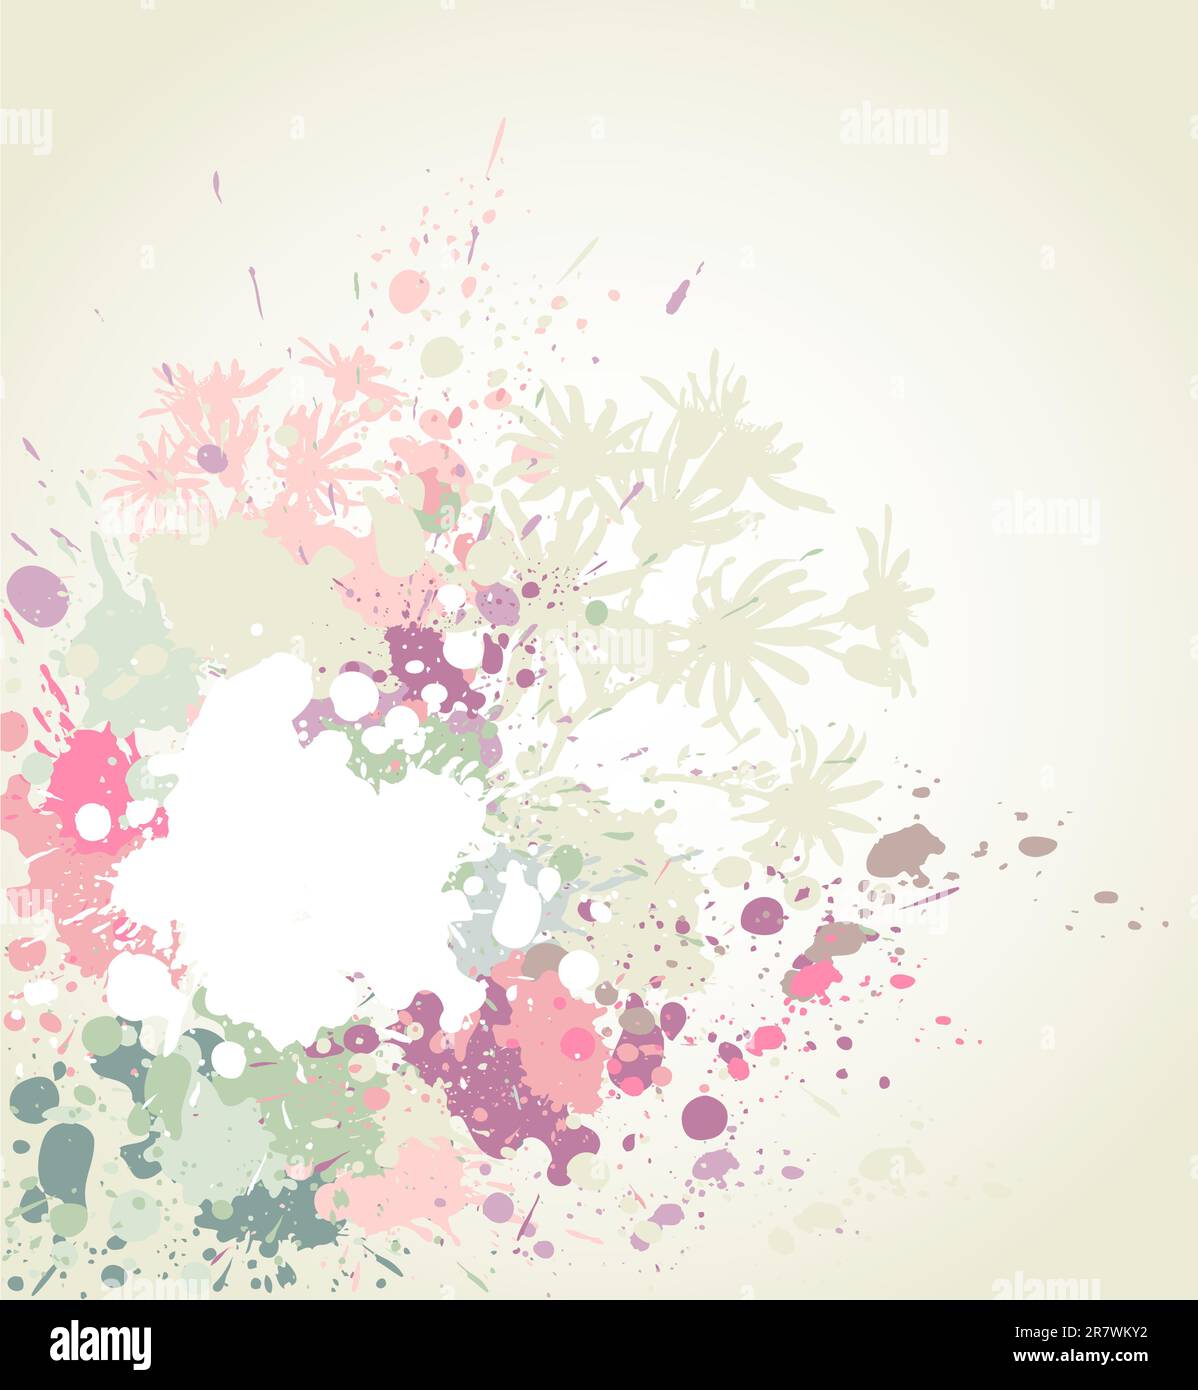 grunge floral background with flowers and blots Stock Vector